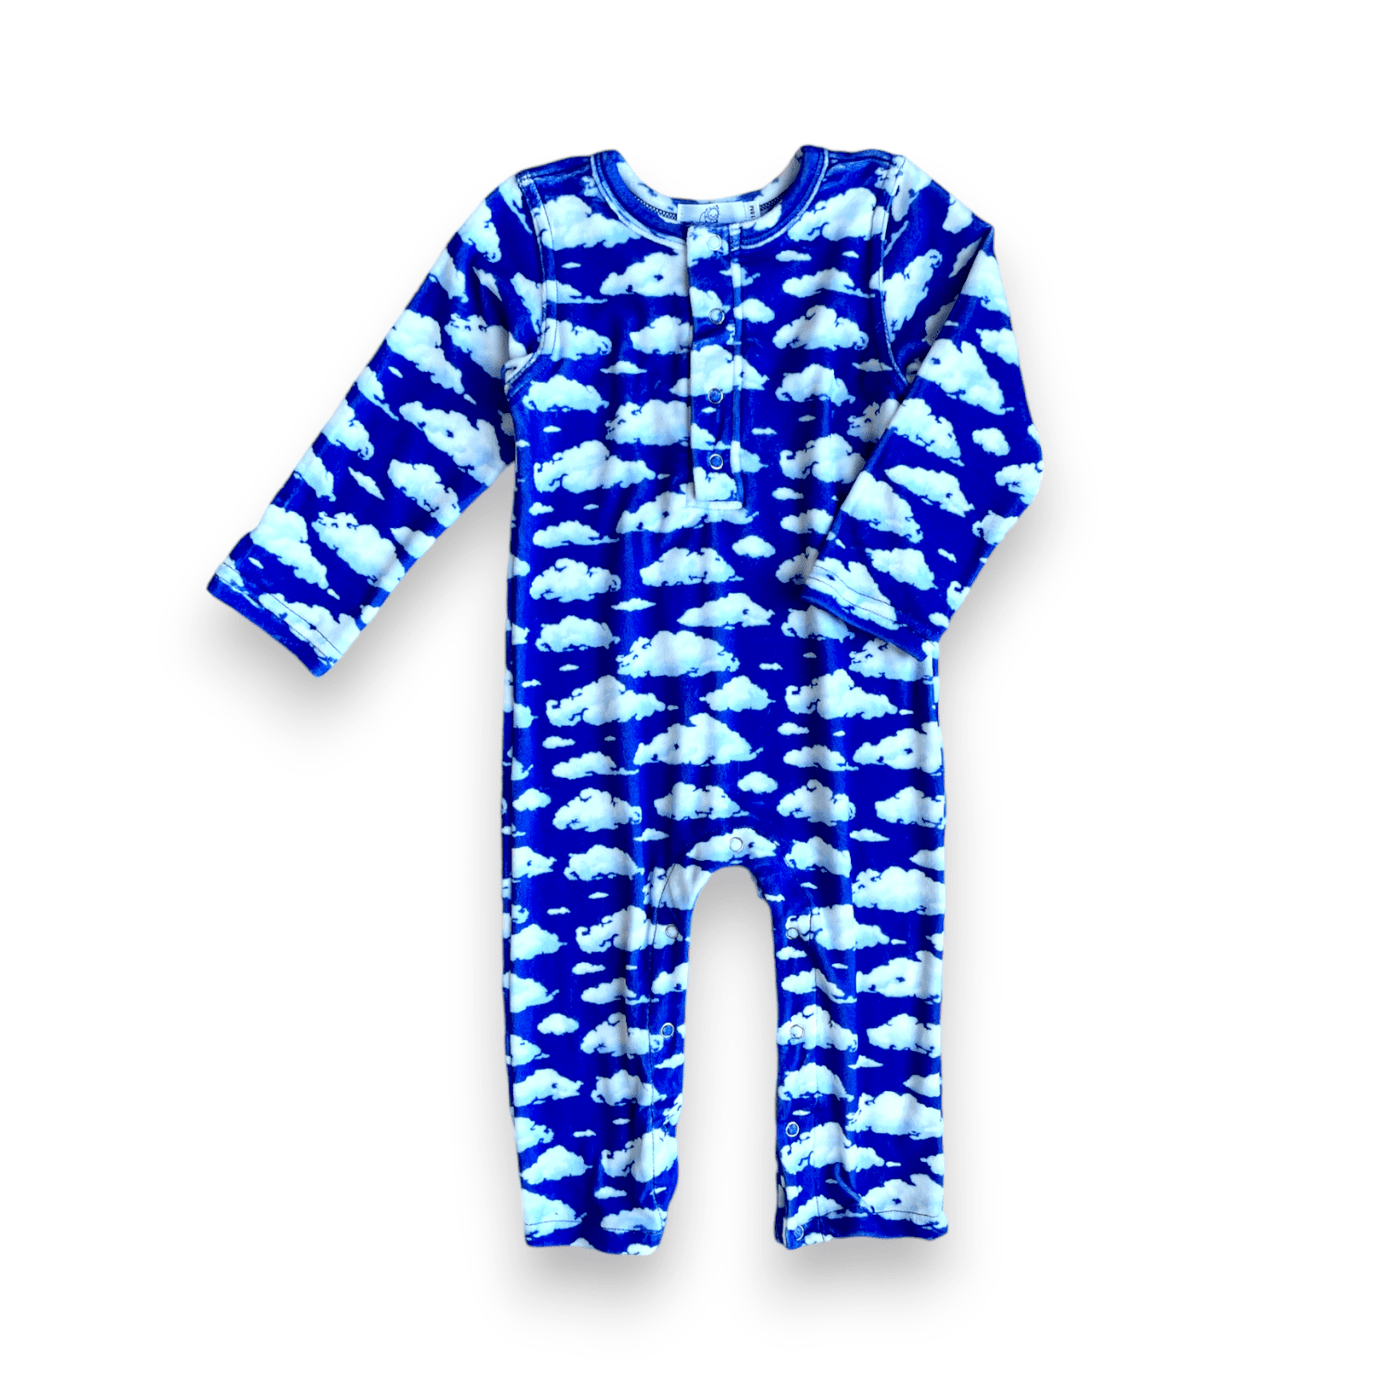 Best Day Ever Kids Baby One-Pieces Daydream Velvet Romper buy online boutique kids clothing